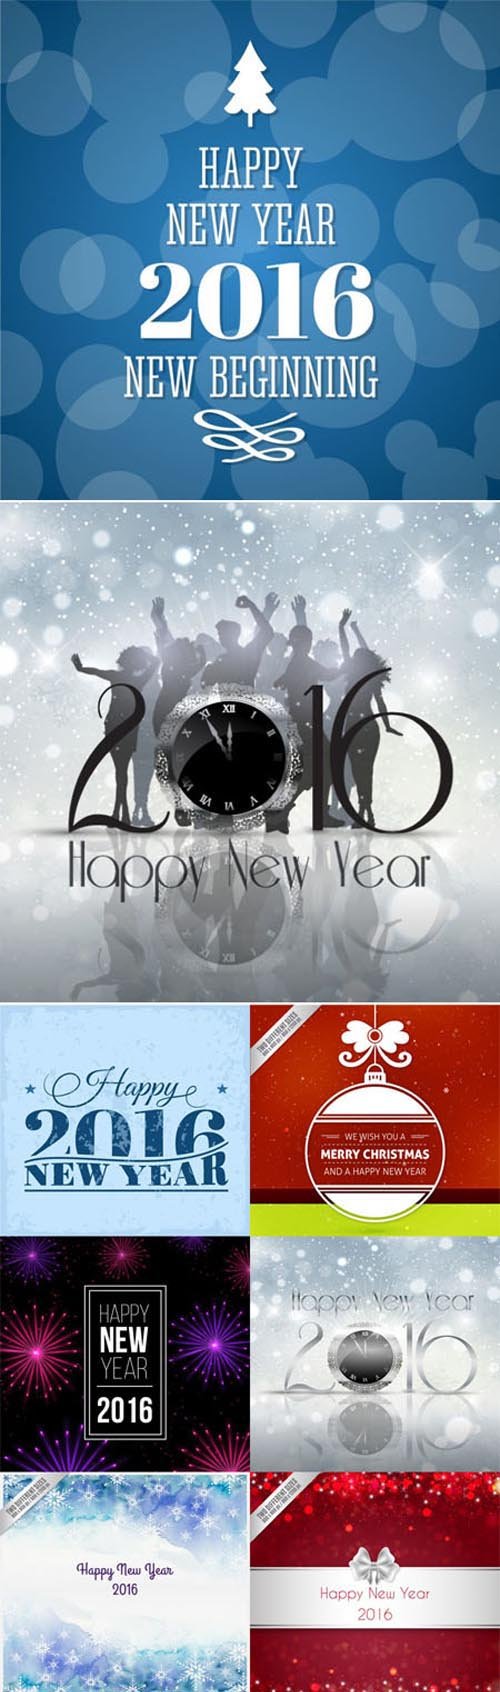 Happy New Year 2016 Backgrounds Vector [Vol.3]